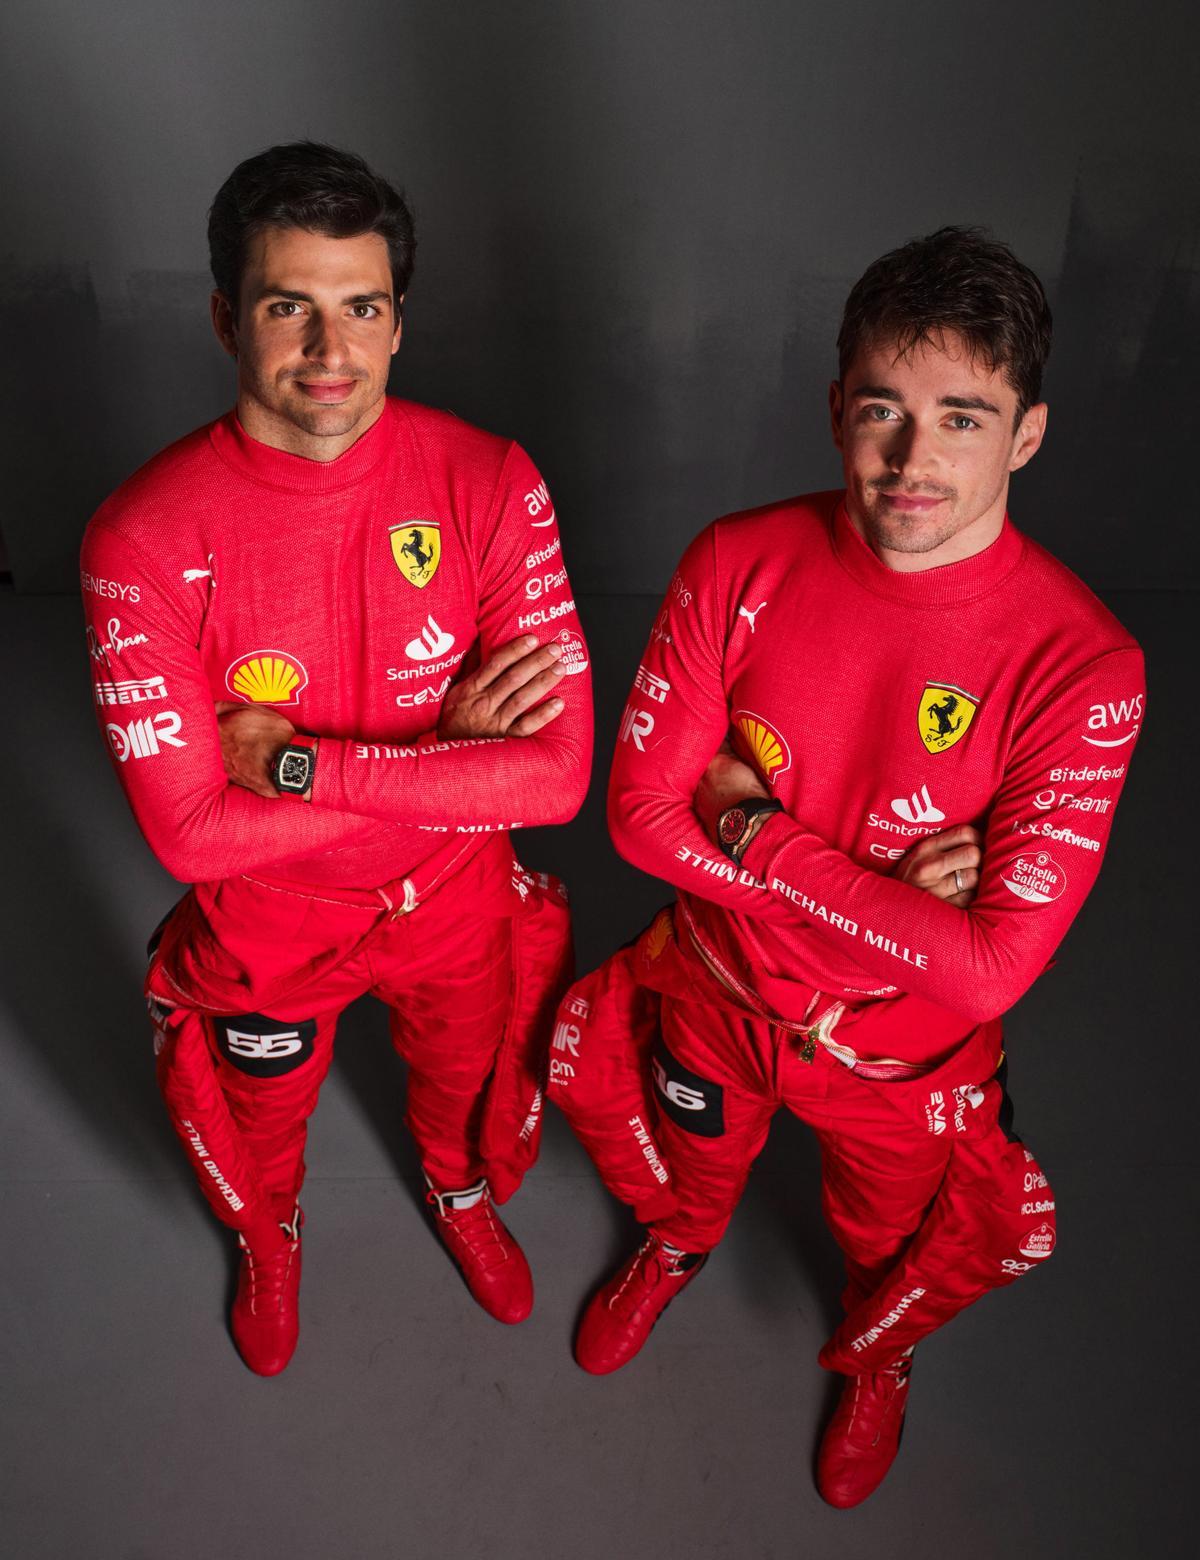 Maranello (Italy), 14/02/2023.- A handout photo made available by the Scuderia Ferrari press office shows drivers Charles Leclerc (R) and Carlos Sainz Jr. (L) posing during the presentation of the team’s new Formula One race car in Maranello, Italy, 14 February 2023. (Fórmula Uno, Italia) EFE/EPA/SCUDERIA FERRARI PRESS OFICE HANDOUT HANDOUT EDITORIAL USE ONLY/NO SALES